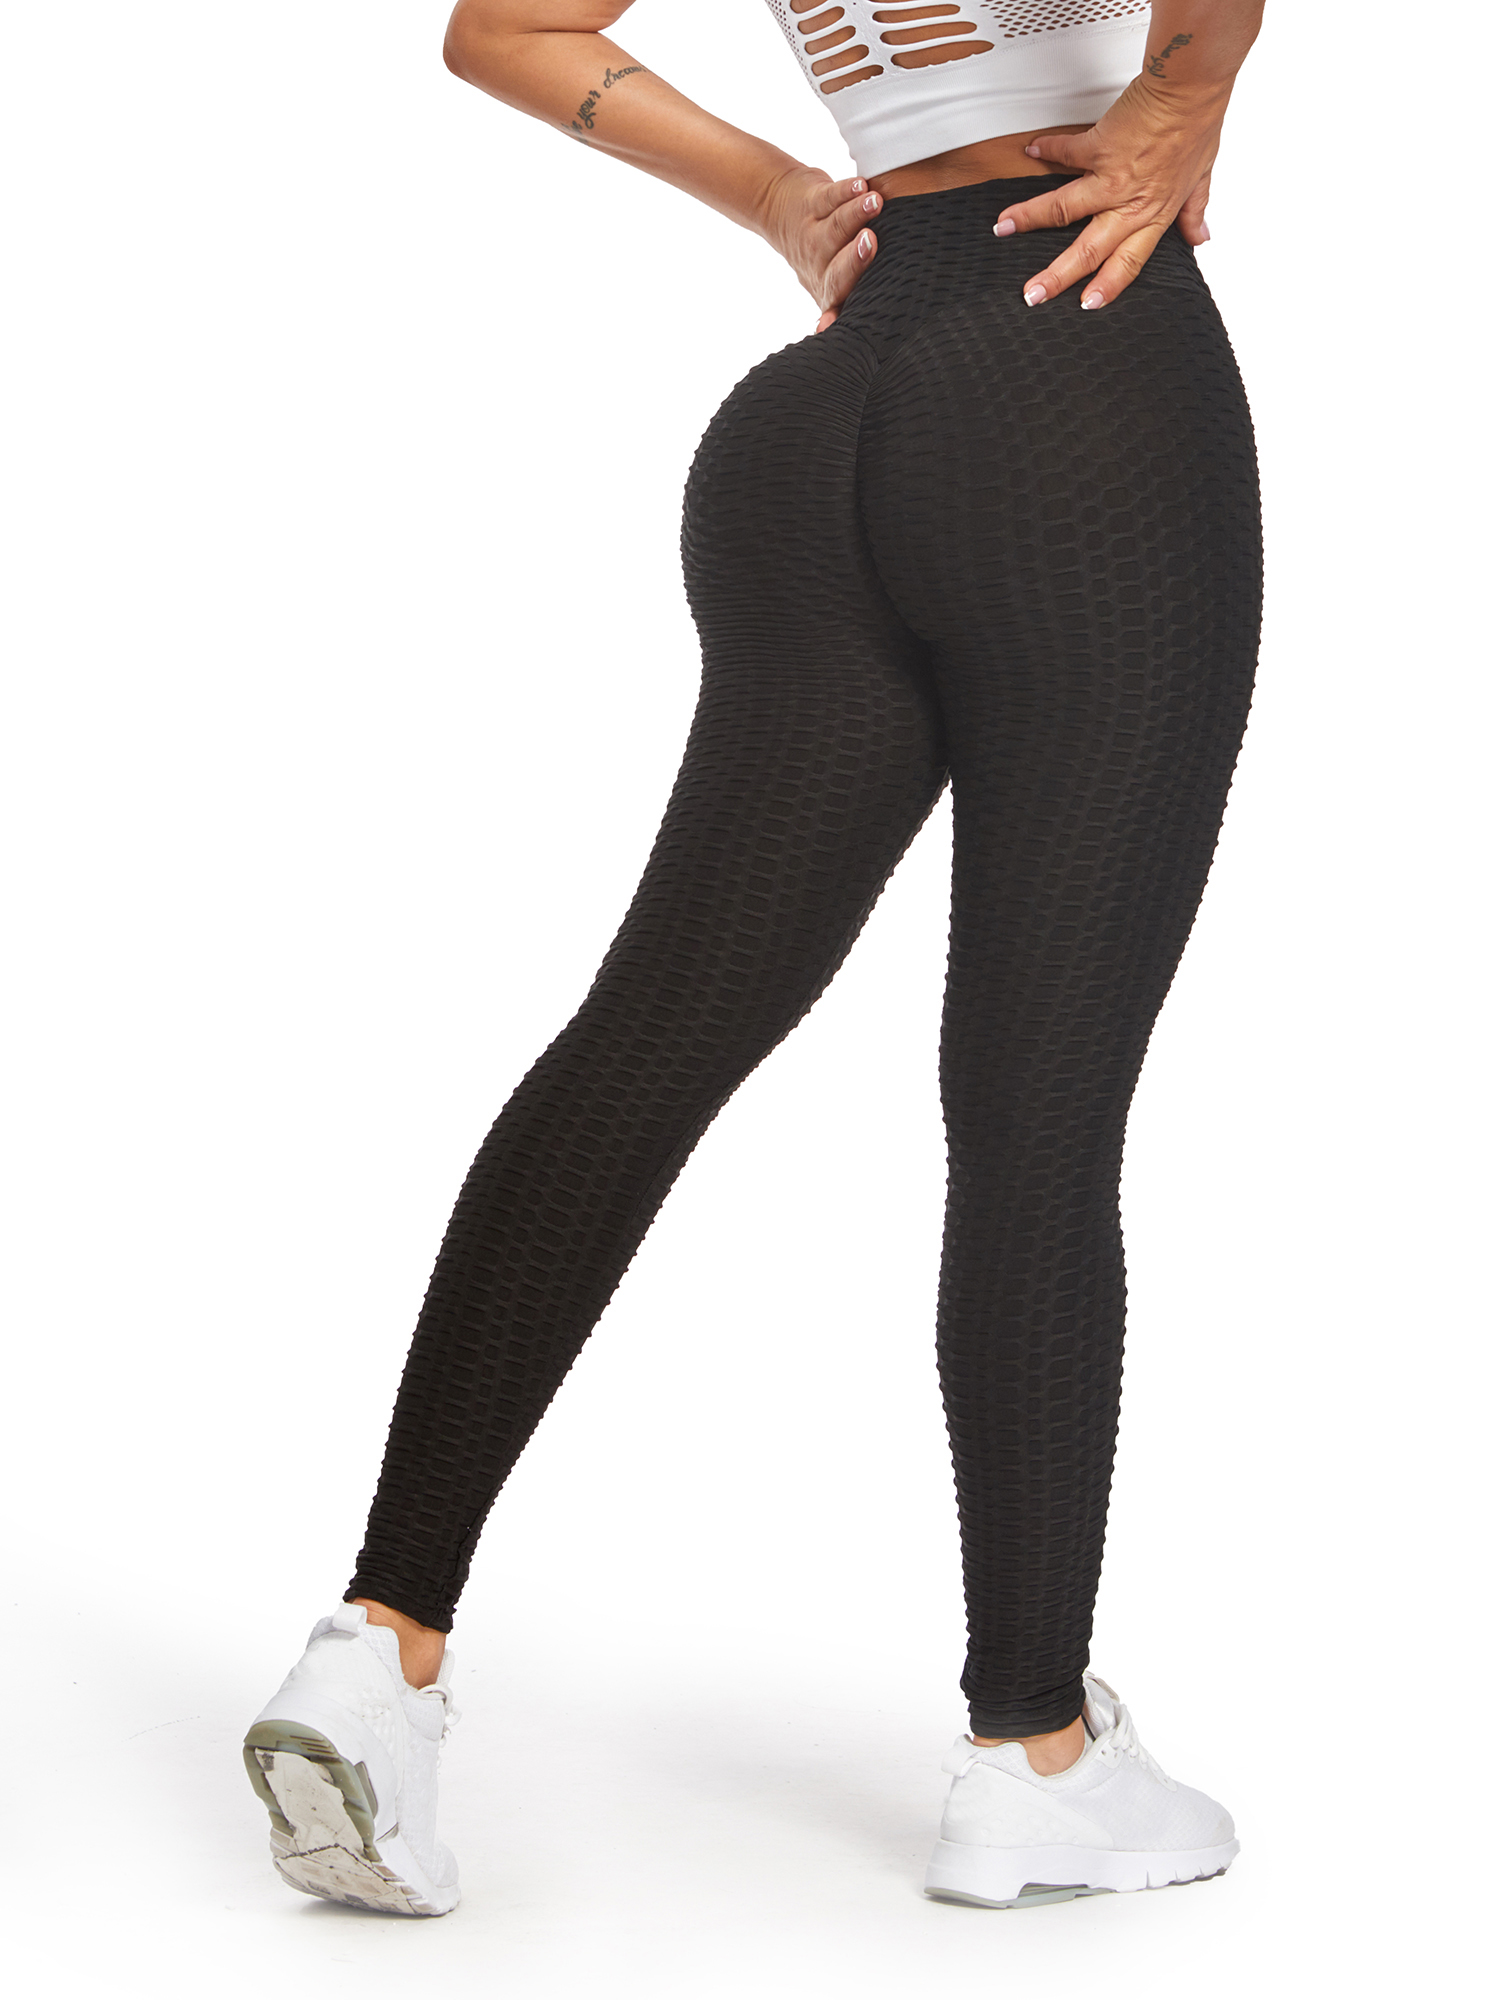 Shein Yoga Pants Woman XL High Waist Leggings Push Up Ruched Gym Workout  Booty